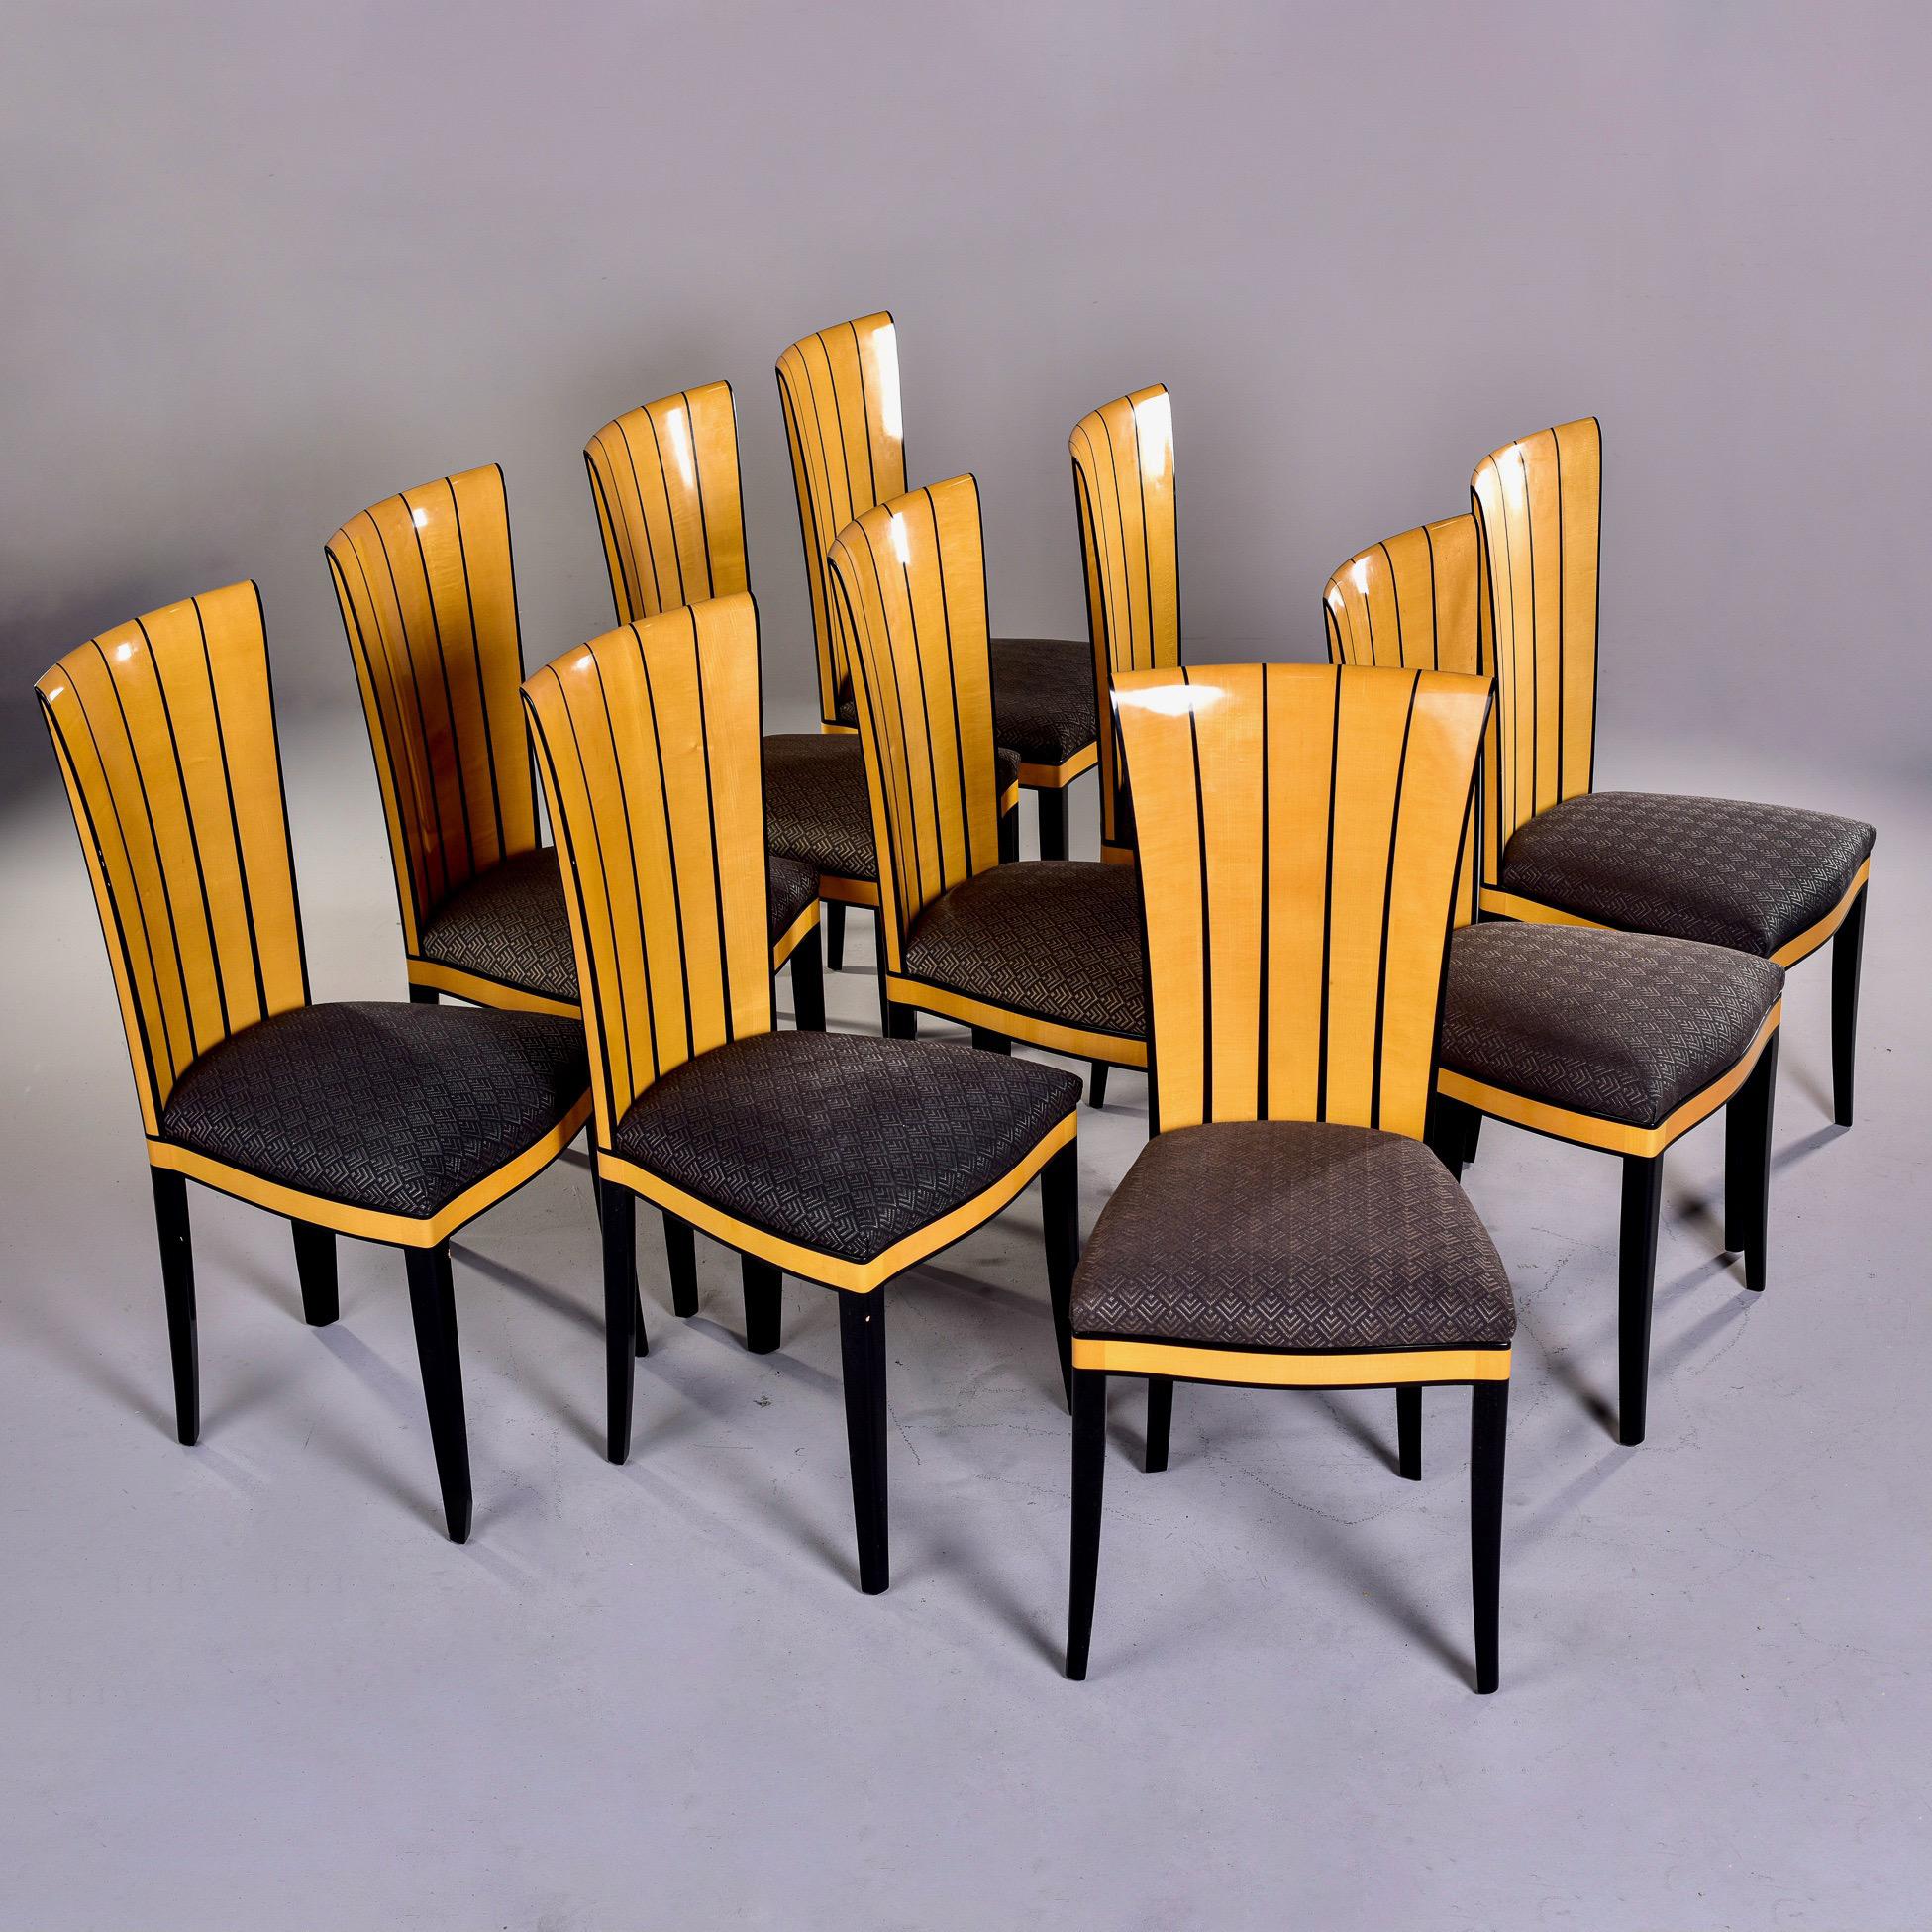 Set of ten circa 1990 dining chairs designed by Eliel Saarinen for his Cranbrook estate in 1929. Licensed for production by various manufacturers since the 1970s, these particular chairs were made by Charles Phipps & Sons. The chairs are made of